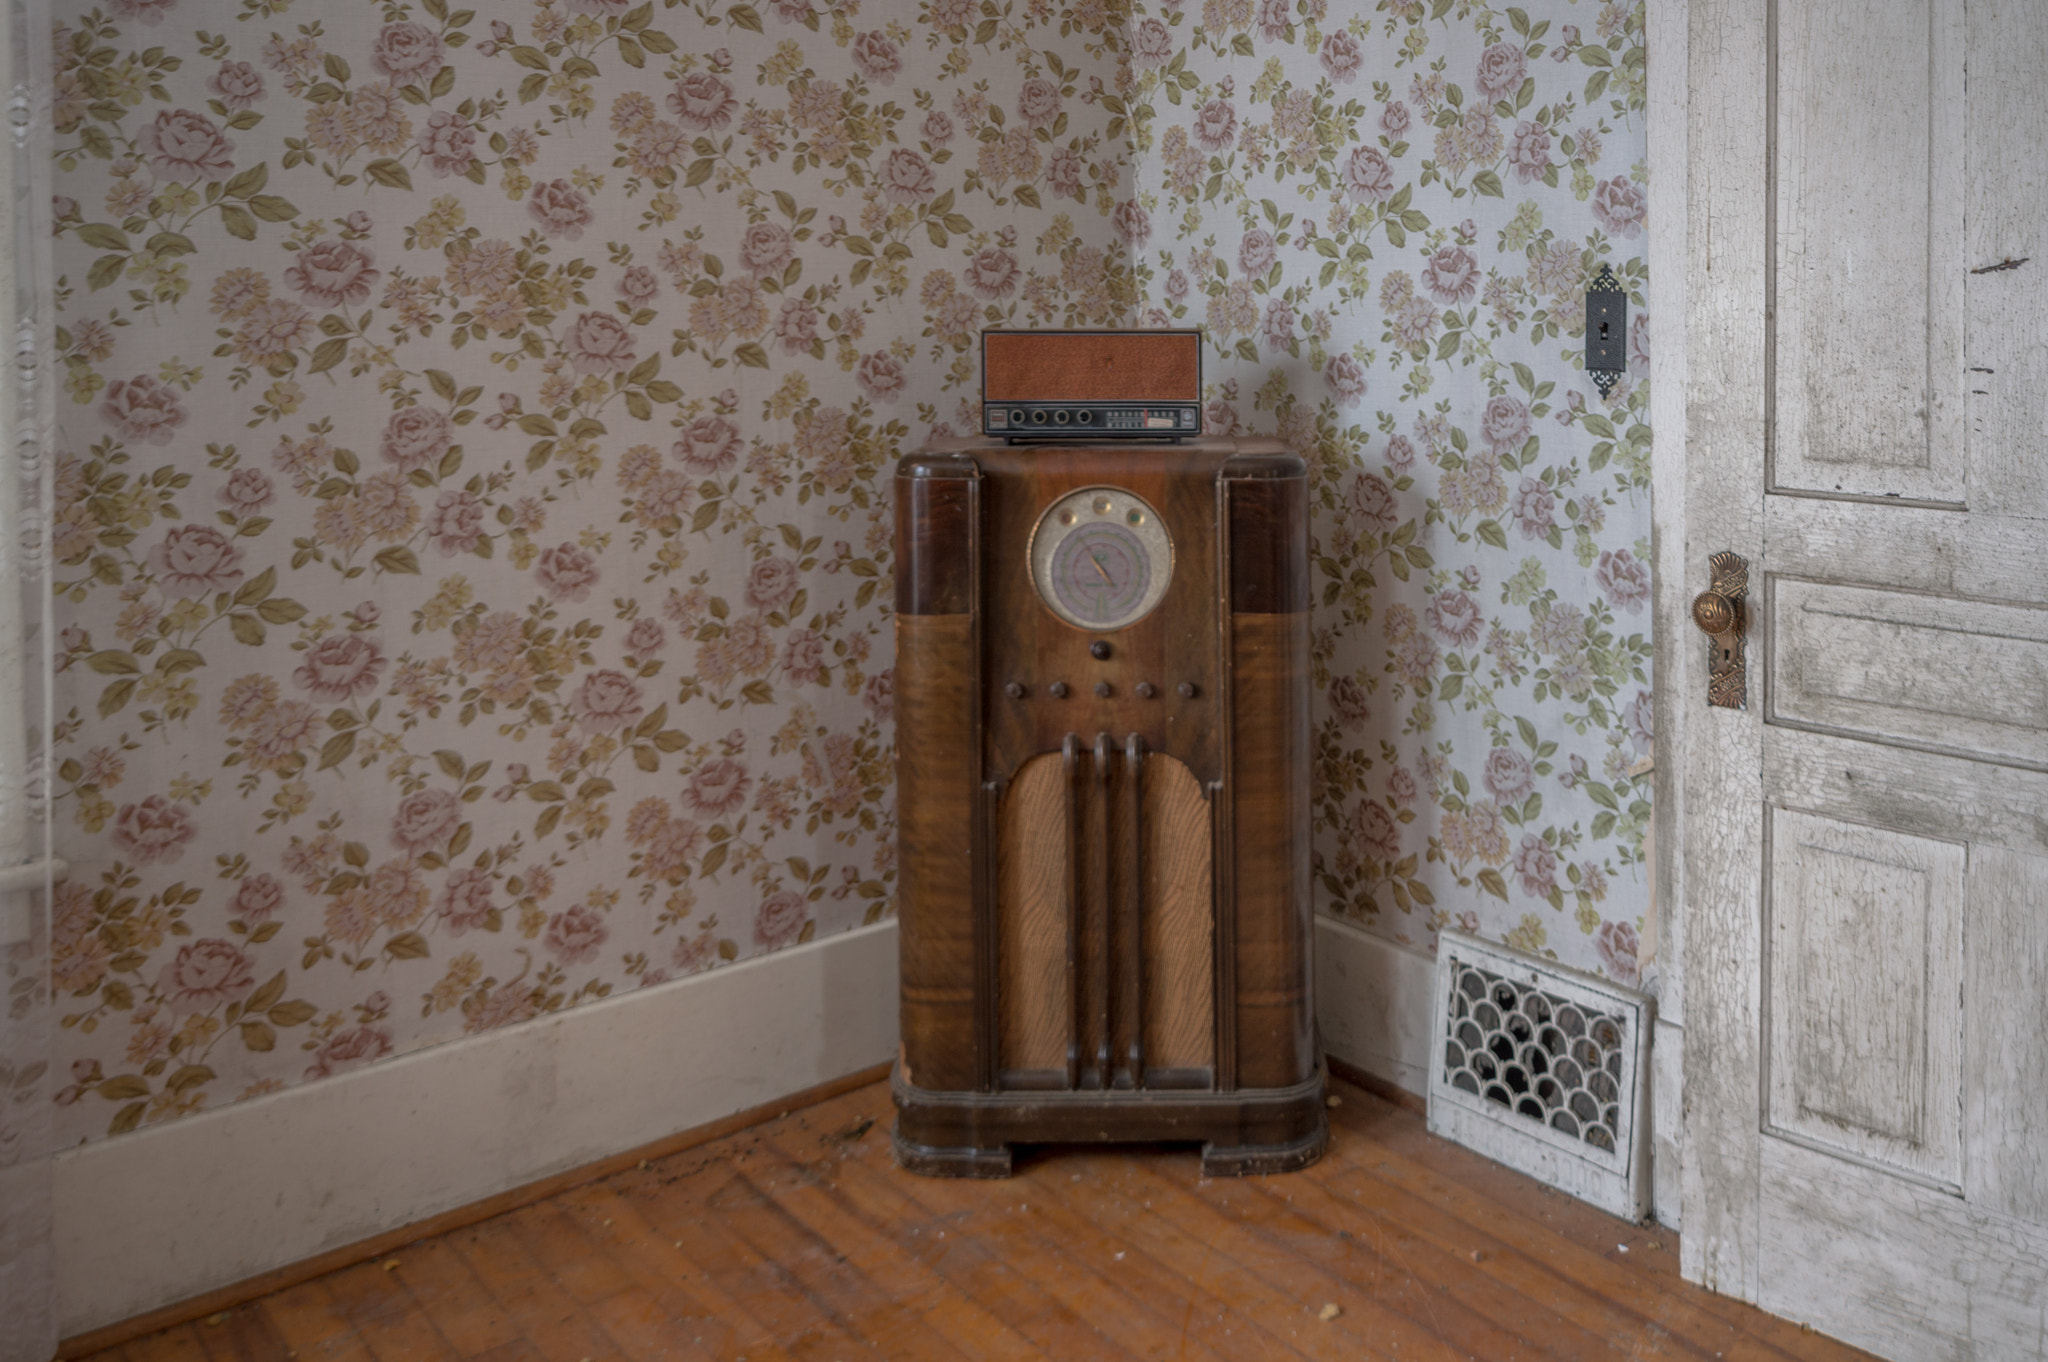 Nikon D3200 sample photo. Antique radio in an abandoned house full of antiques photography